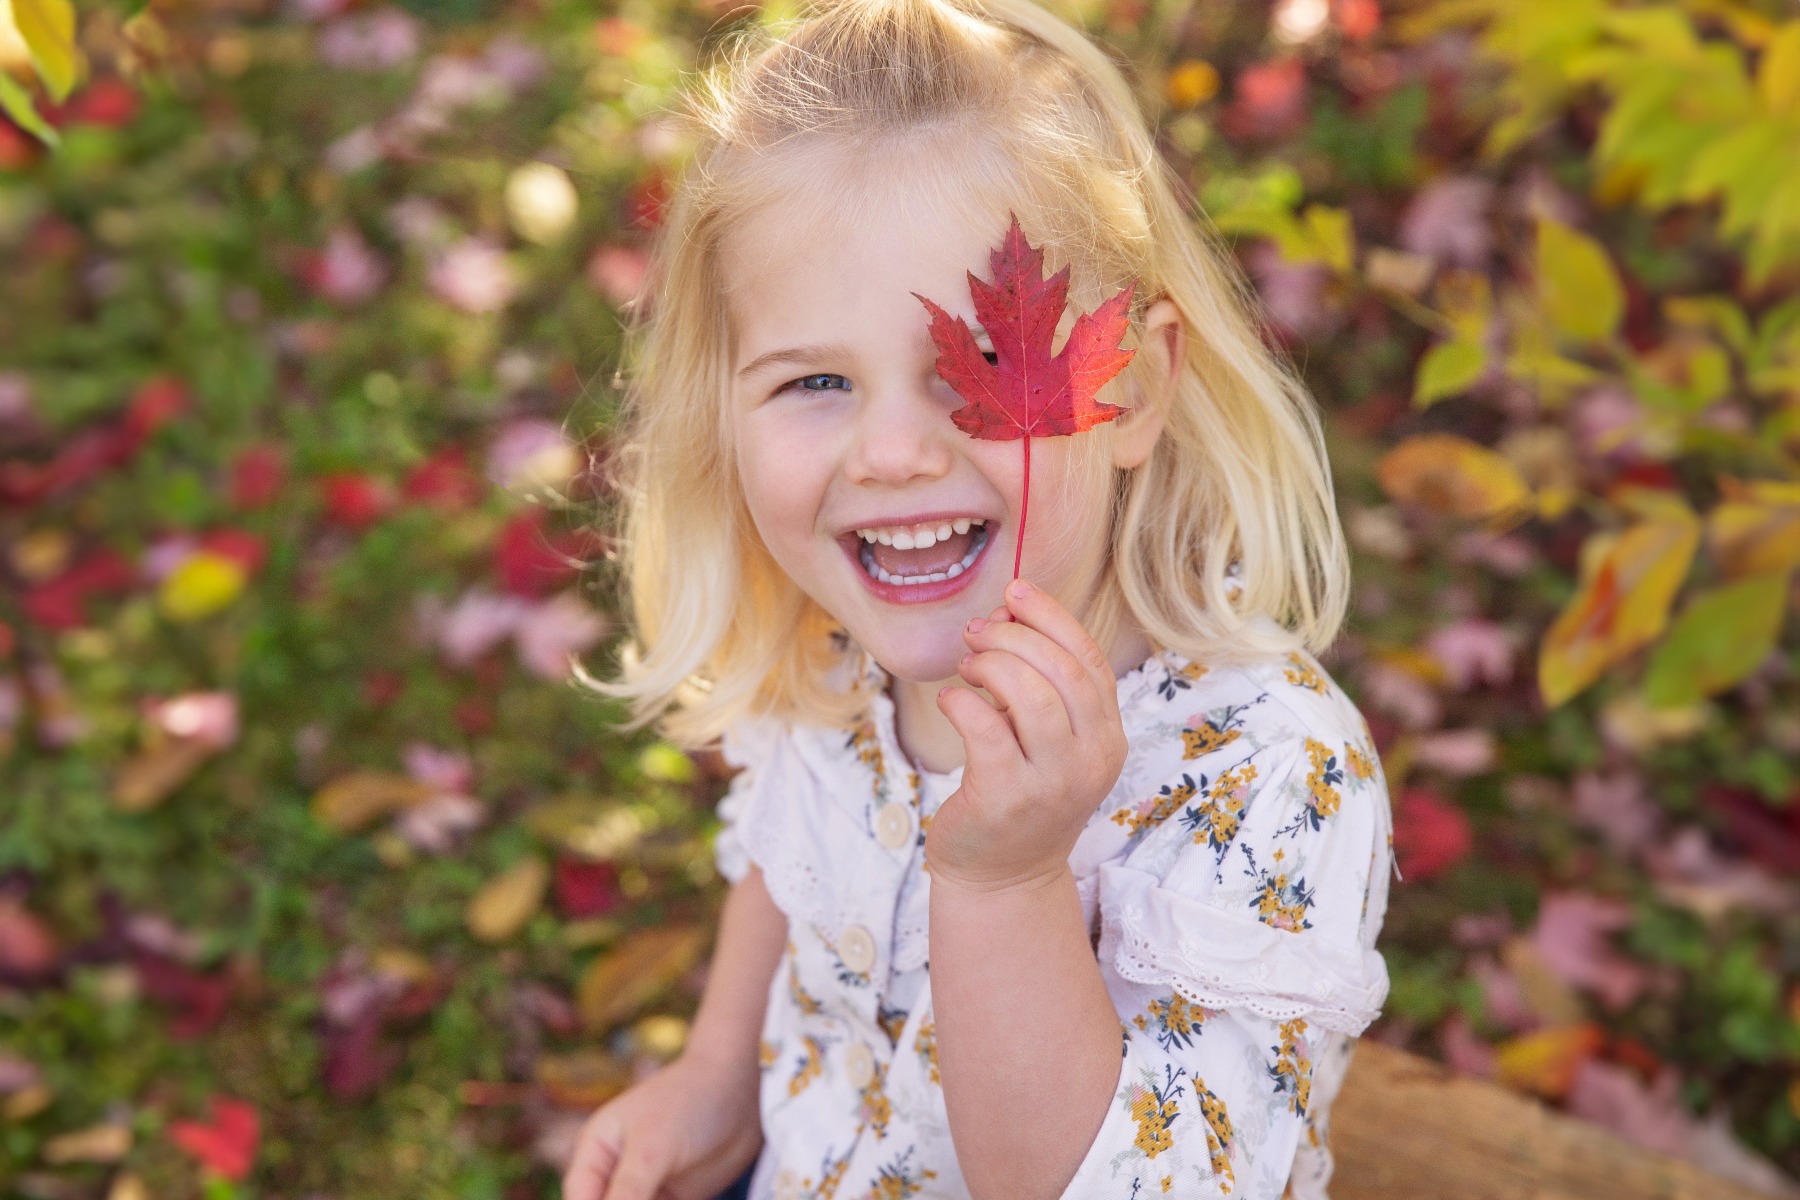 blond haired girl with a red maple leaf laughs